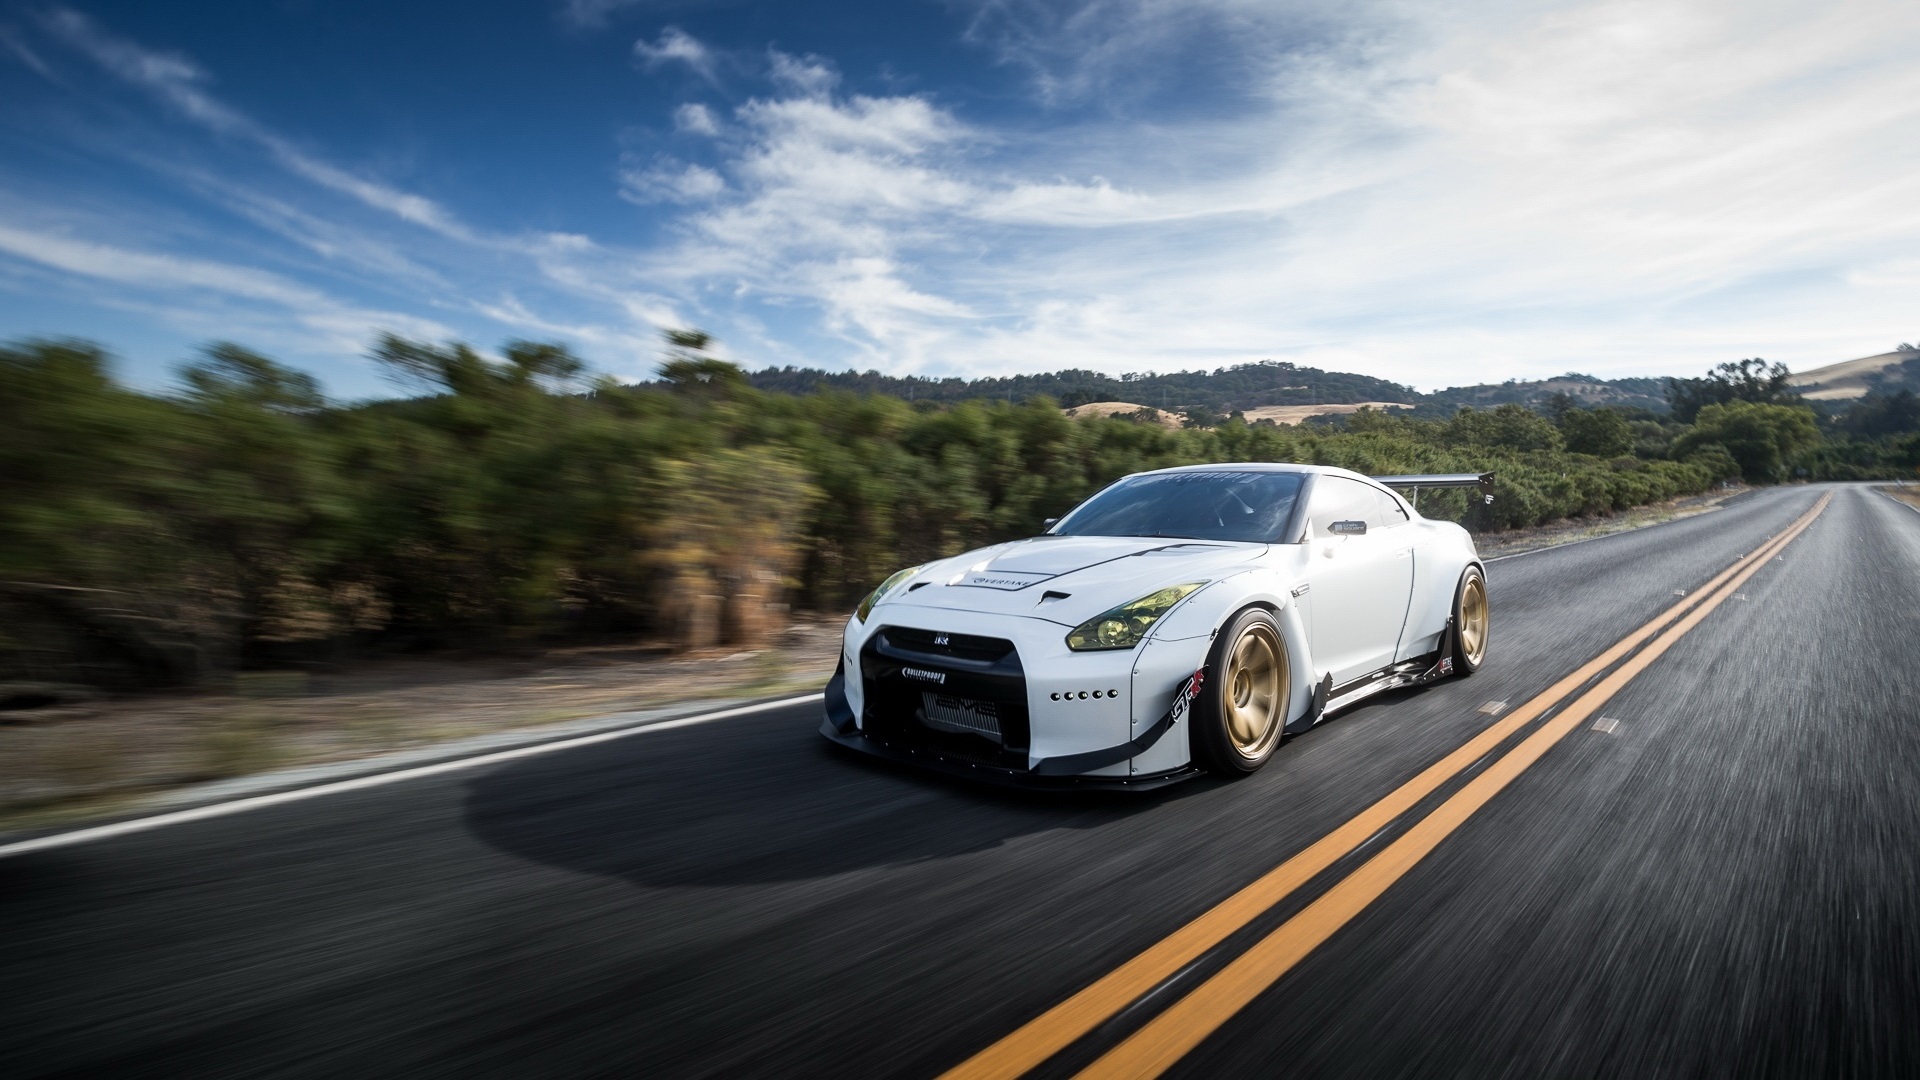 General 1920x1080 Nissan GT-R road white cars supercars asphalt nature daylight sunlight trees plants sky clouds Nissan Japanese cars bodykit